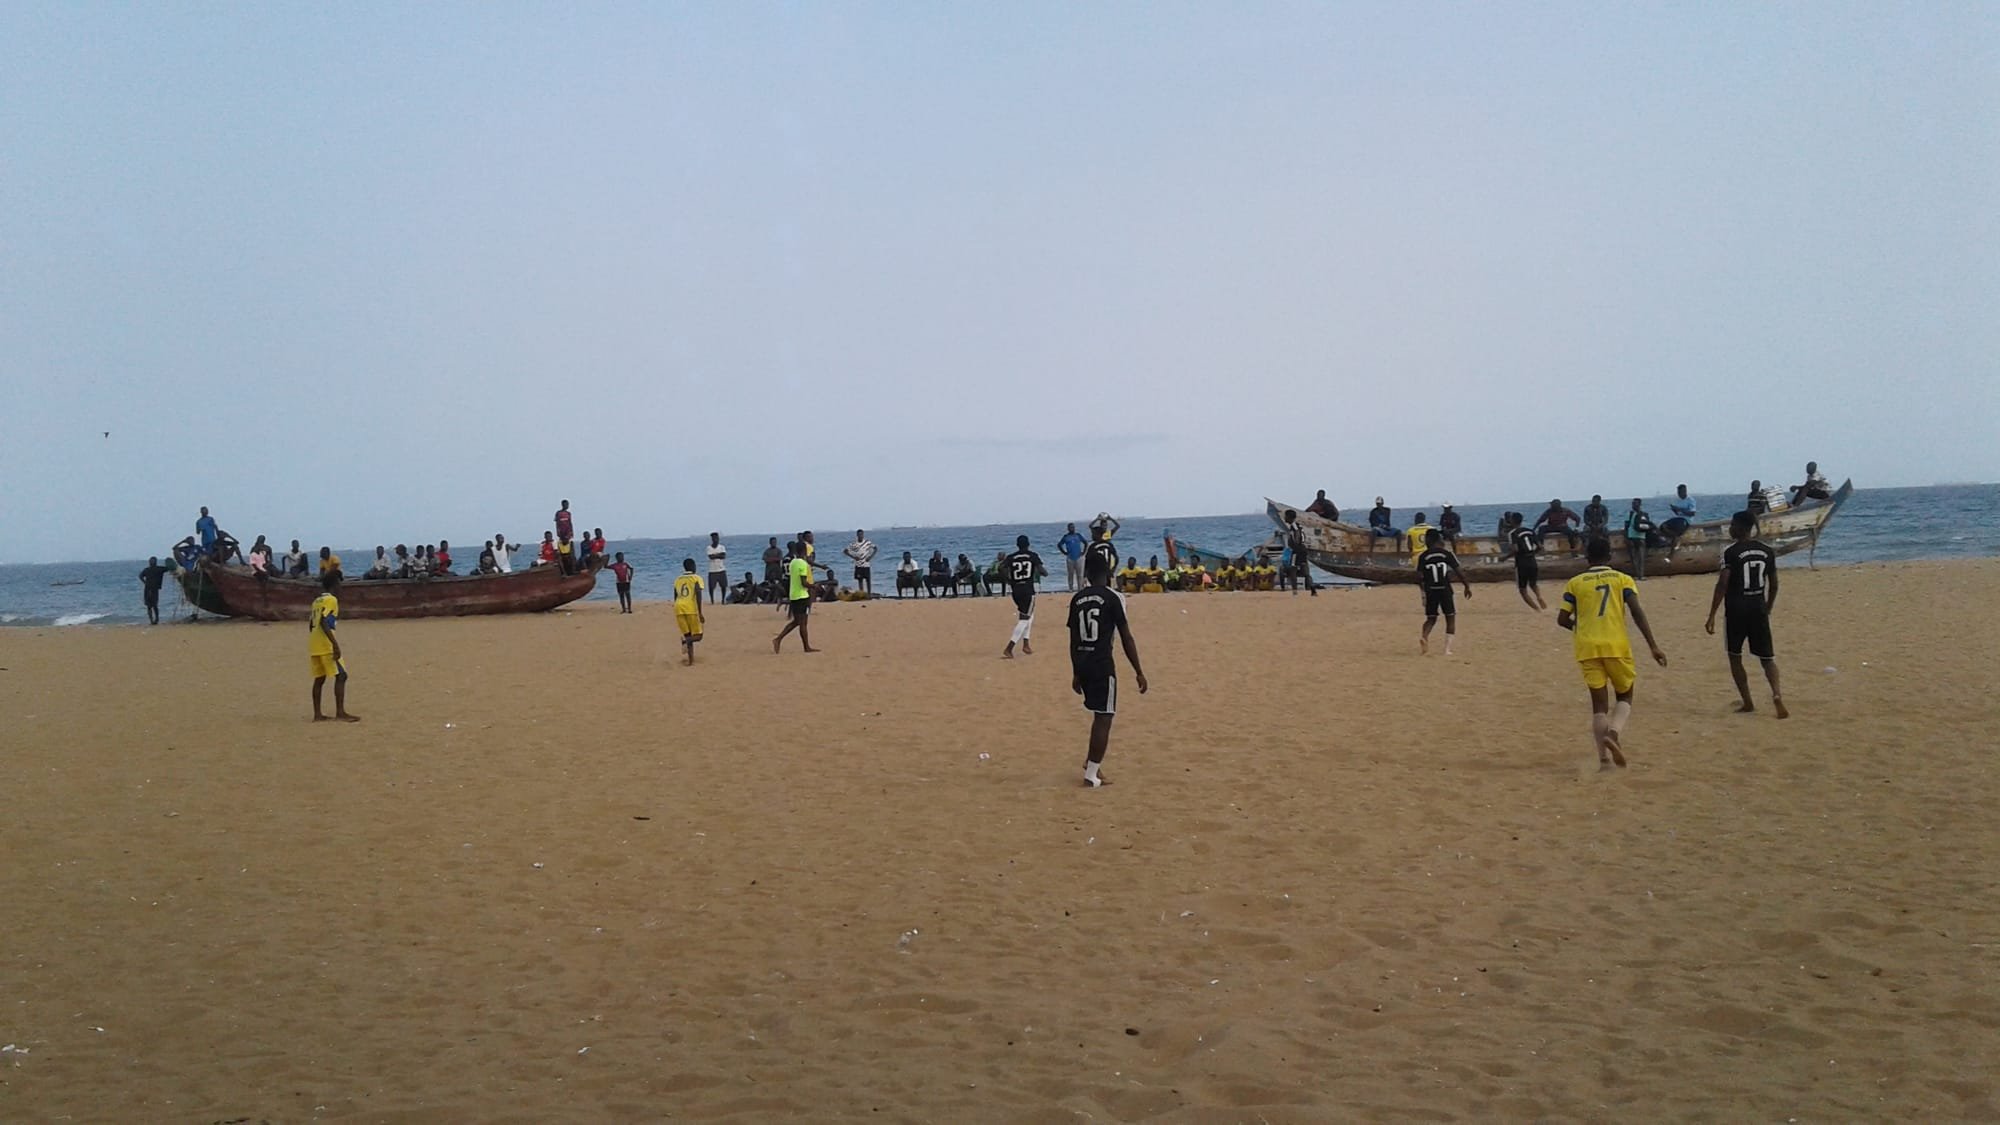 Beach Soccer Is Immensely Popular in Lomé